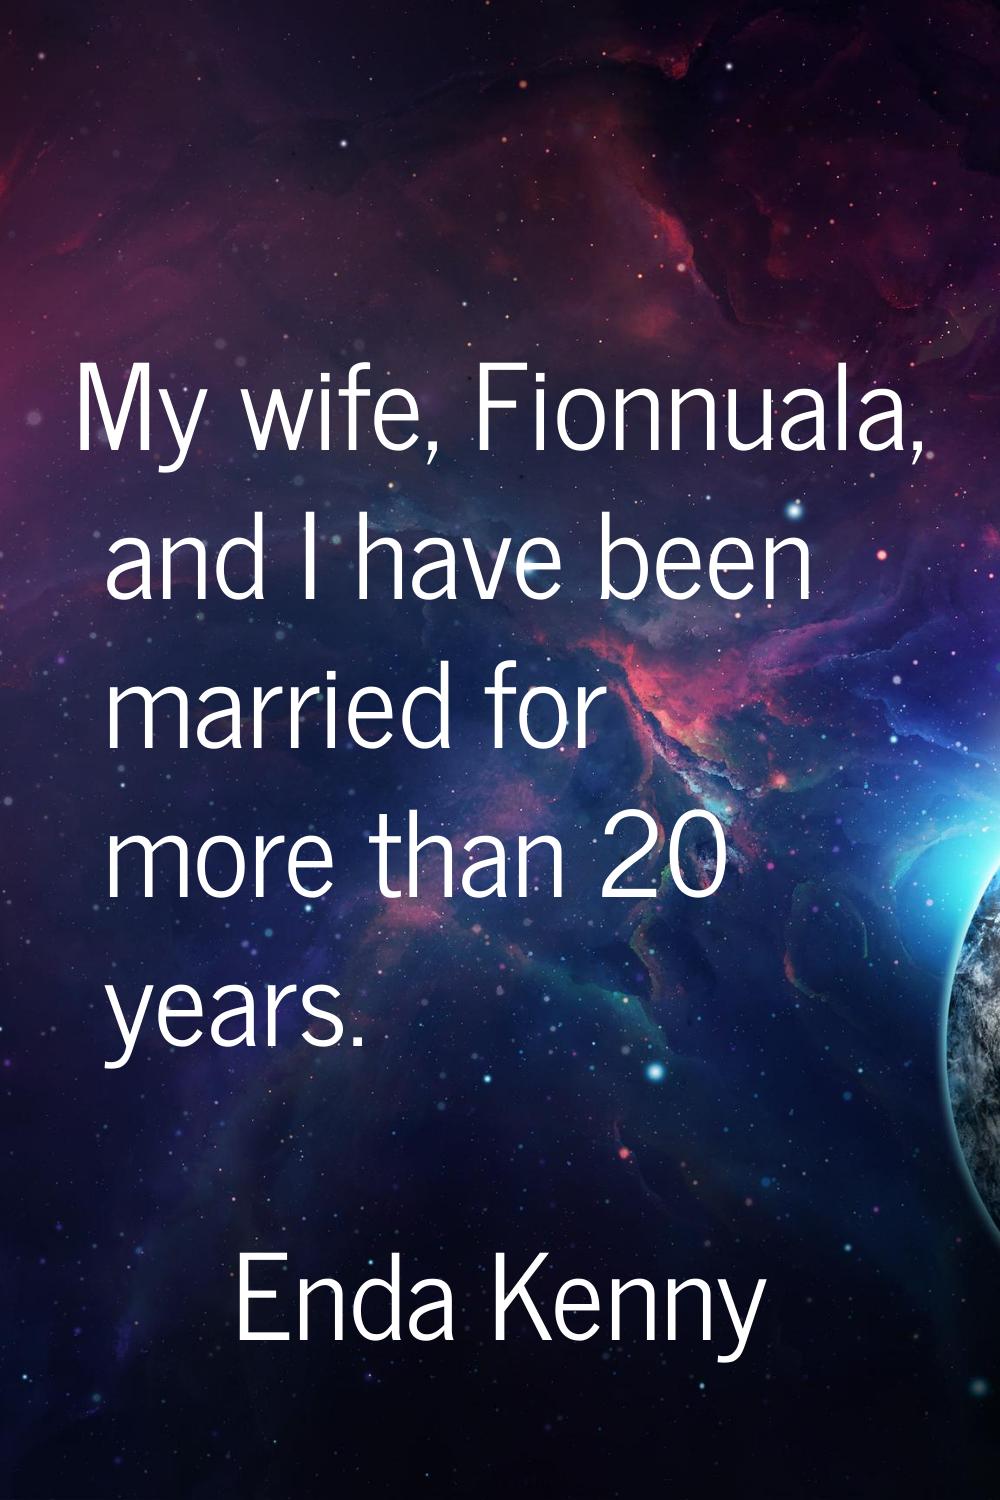 My wife, Fionnuala, and I have been married for more than 20 years.